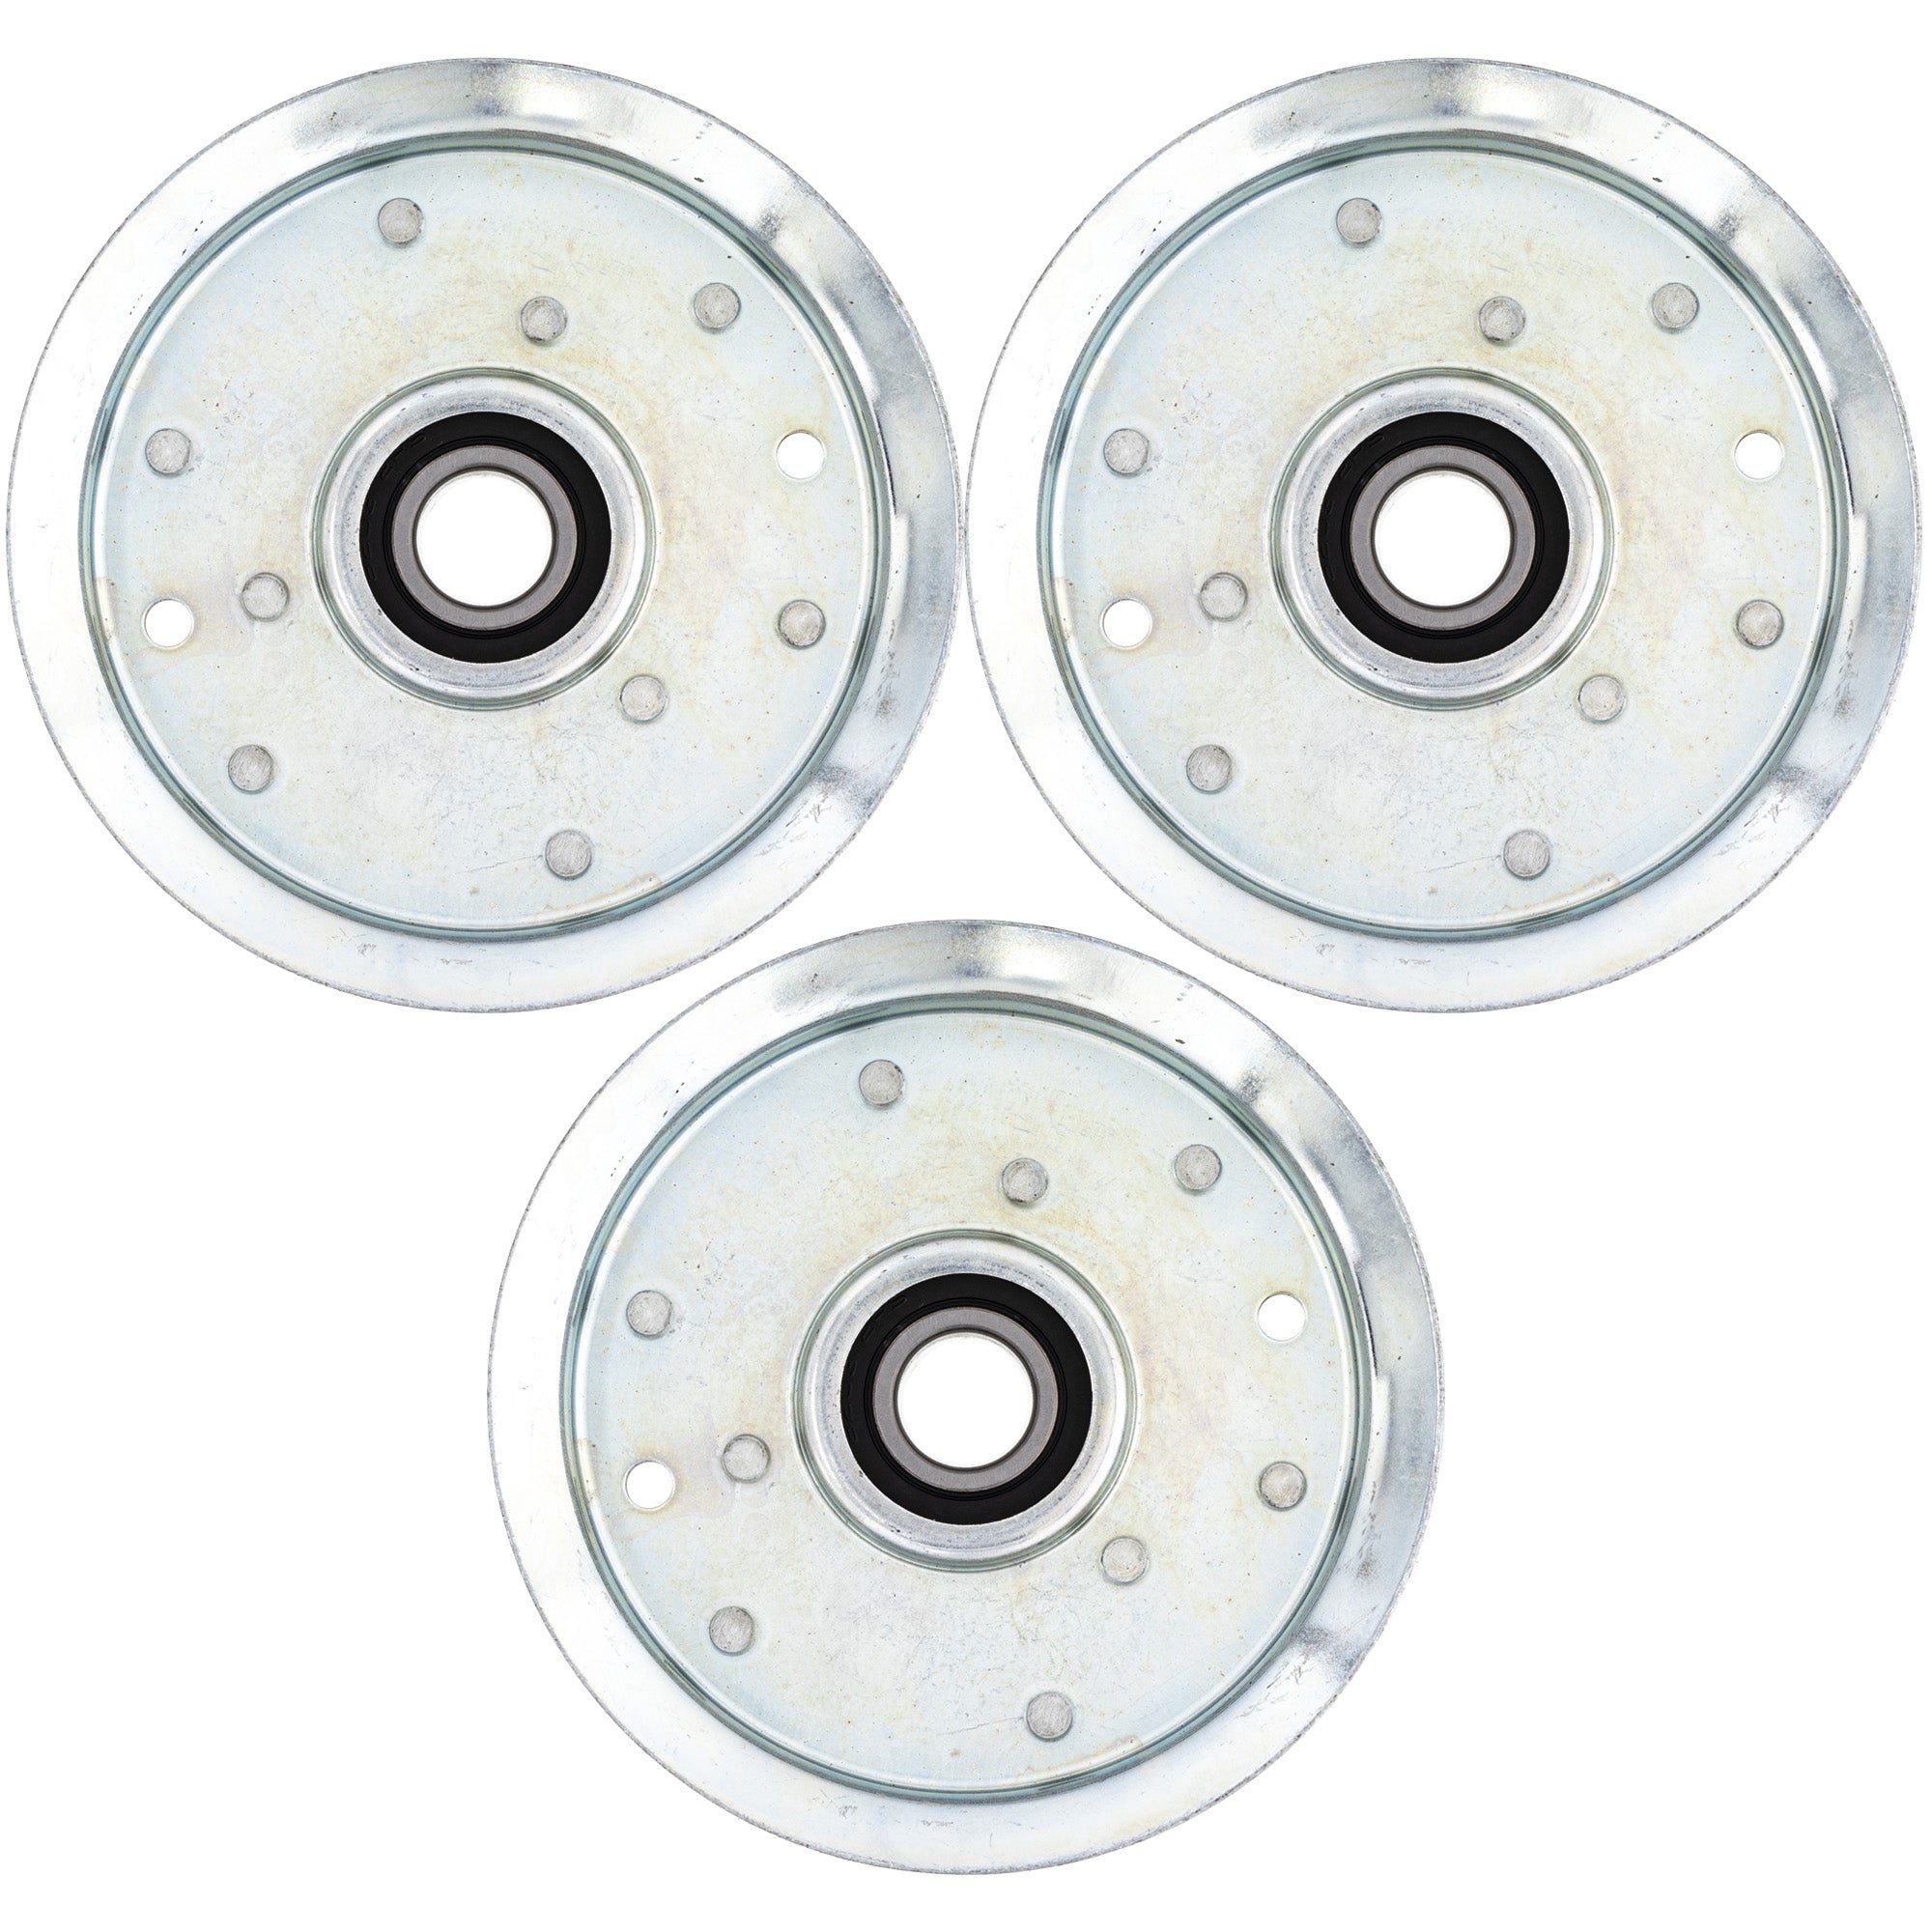 8TEN 810-CID2241L Idler Pulley 3-Pack for zOTHER YAZOO-KEES Woods